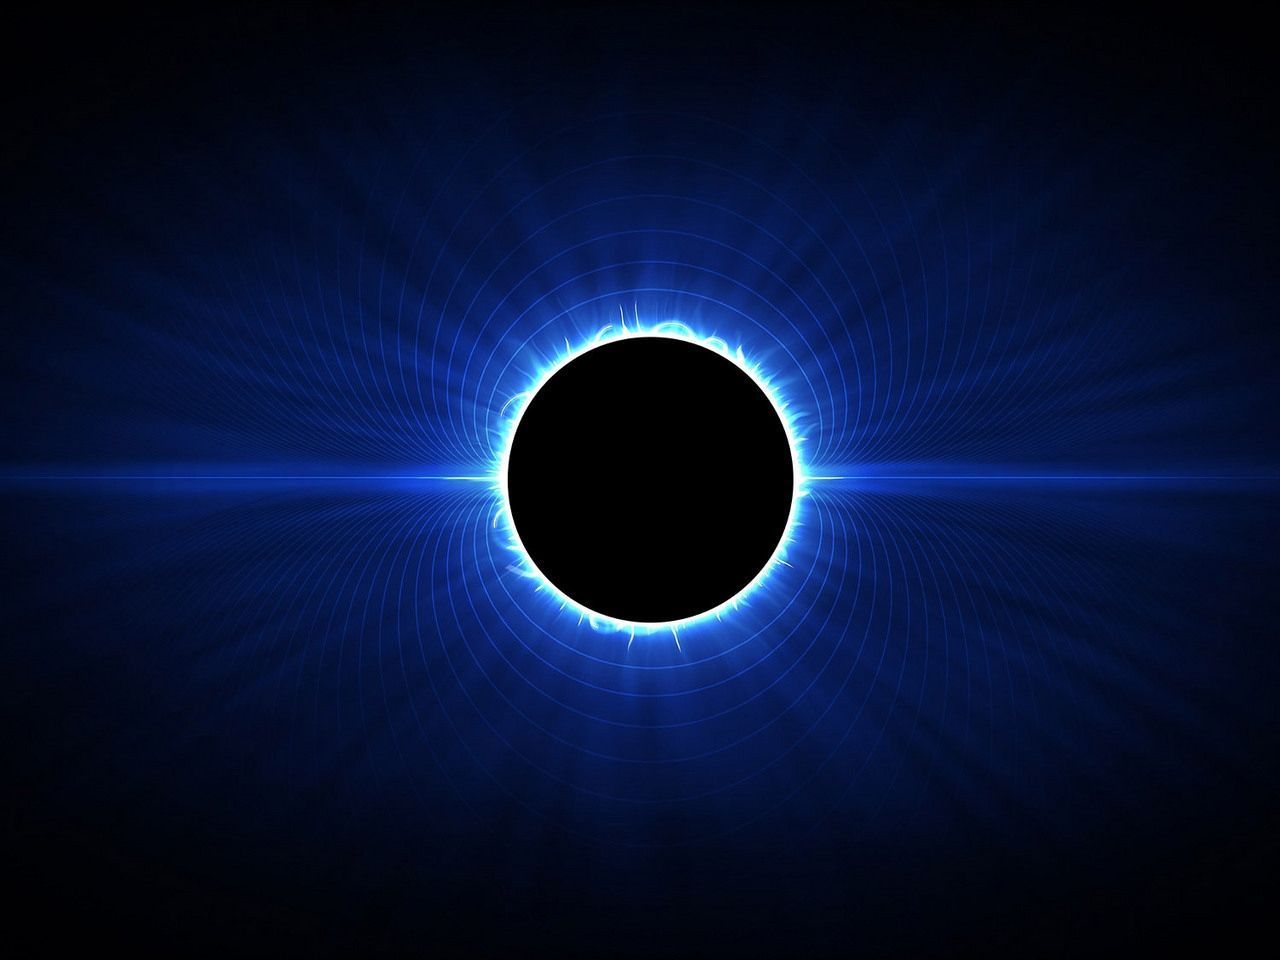 Download Wallpaper 1280x960 Abstraction, Eclipse, Space, Light ...